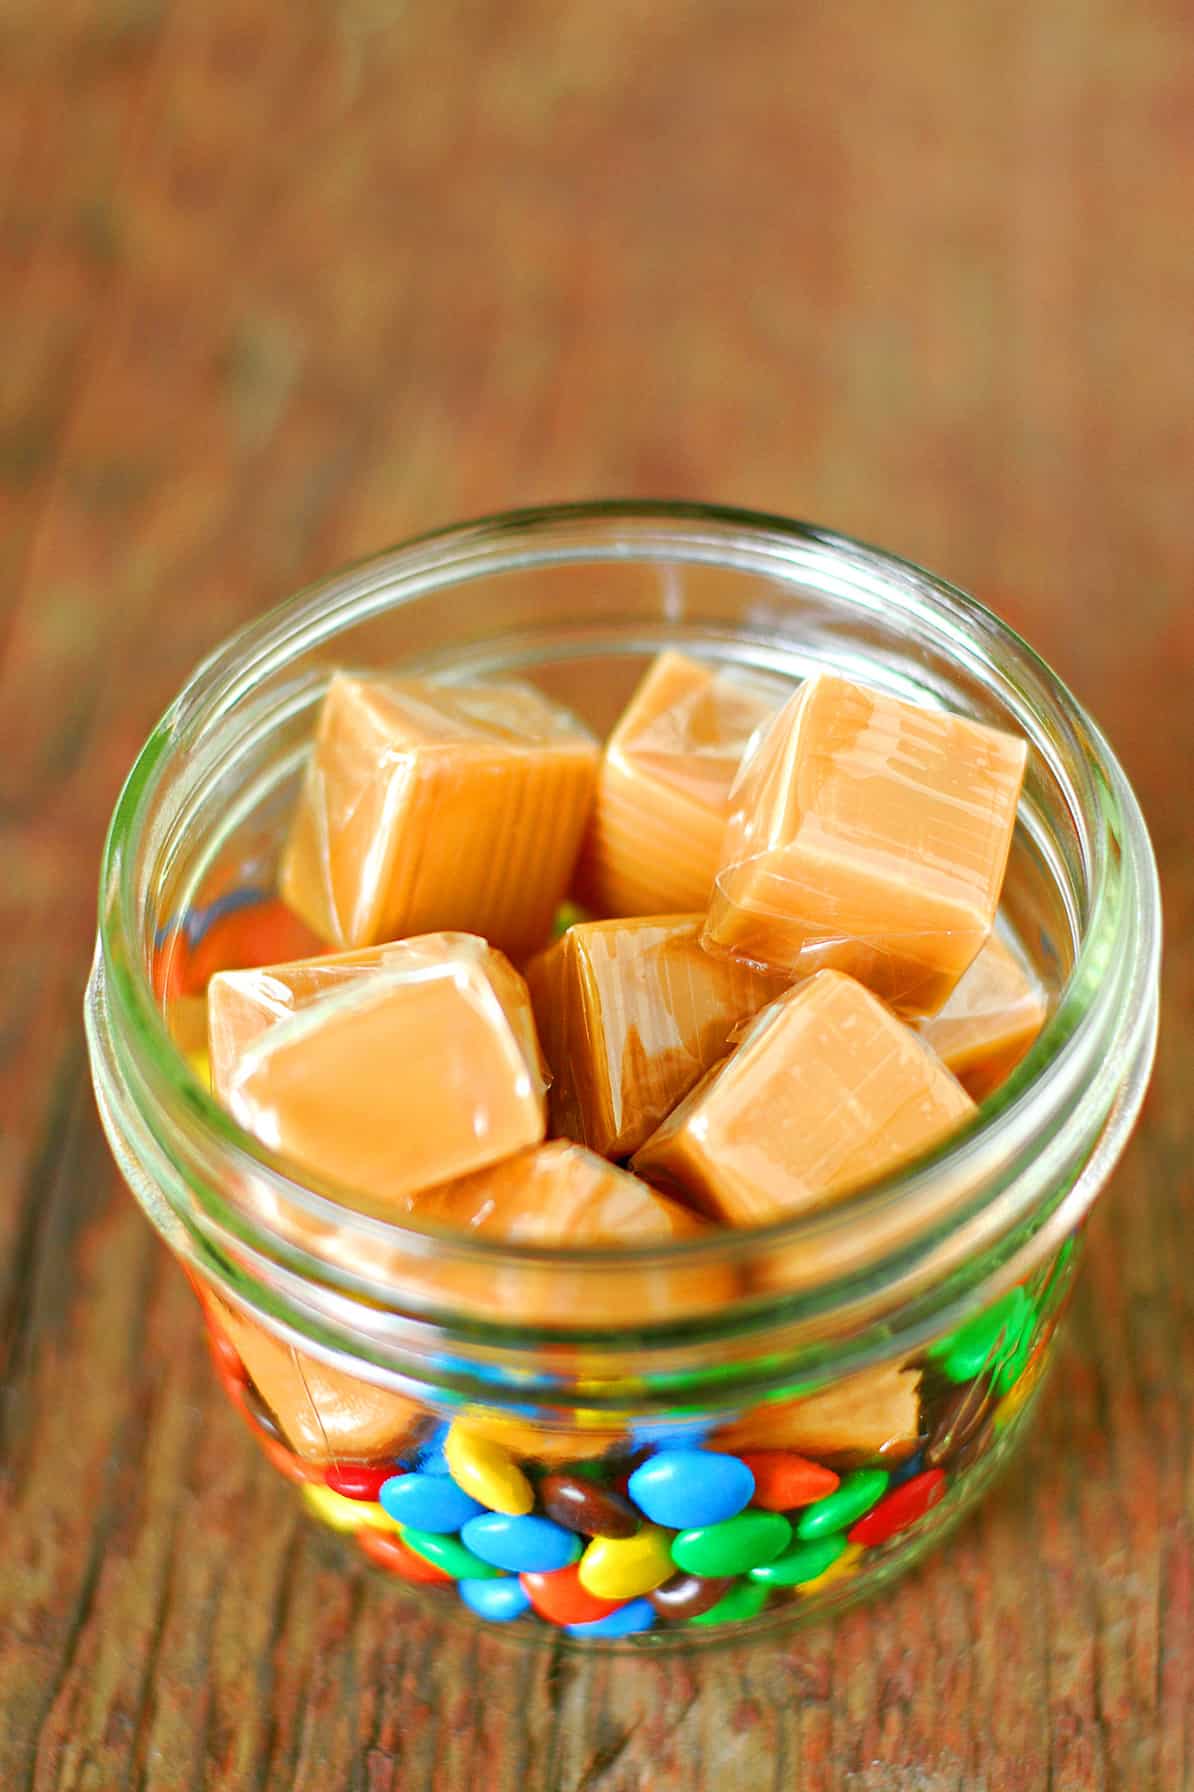 Wrapped caramels in a jar of M&M's.